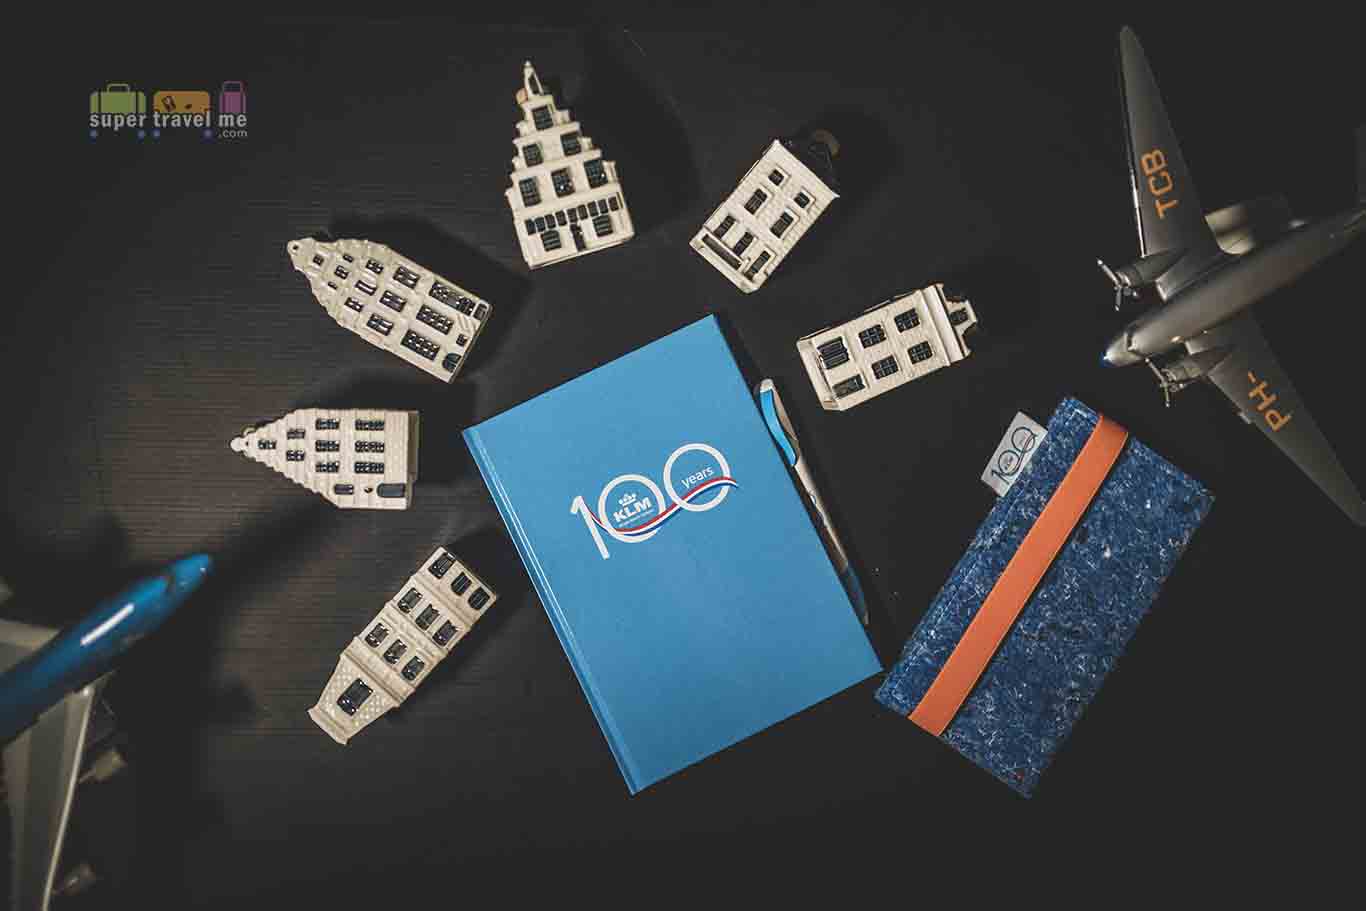 KLM Celebrated 100 Years on 7 October 2019